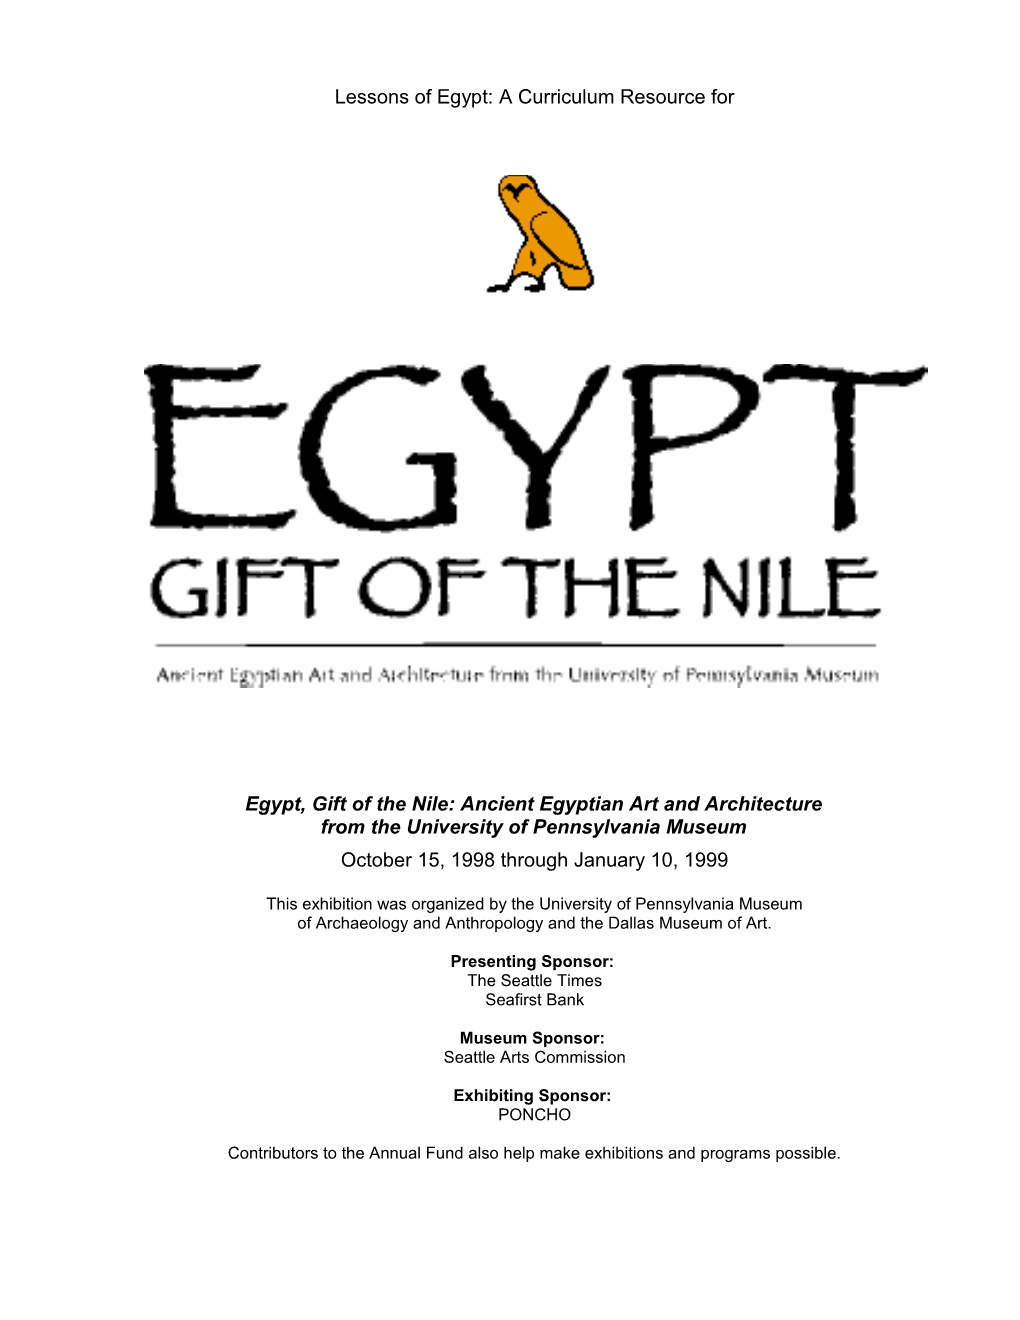 Egypt, Gift of the Nile: Ancient Egyptian Art and Architecture